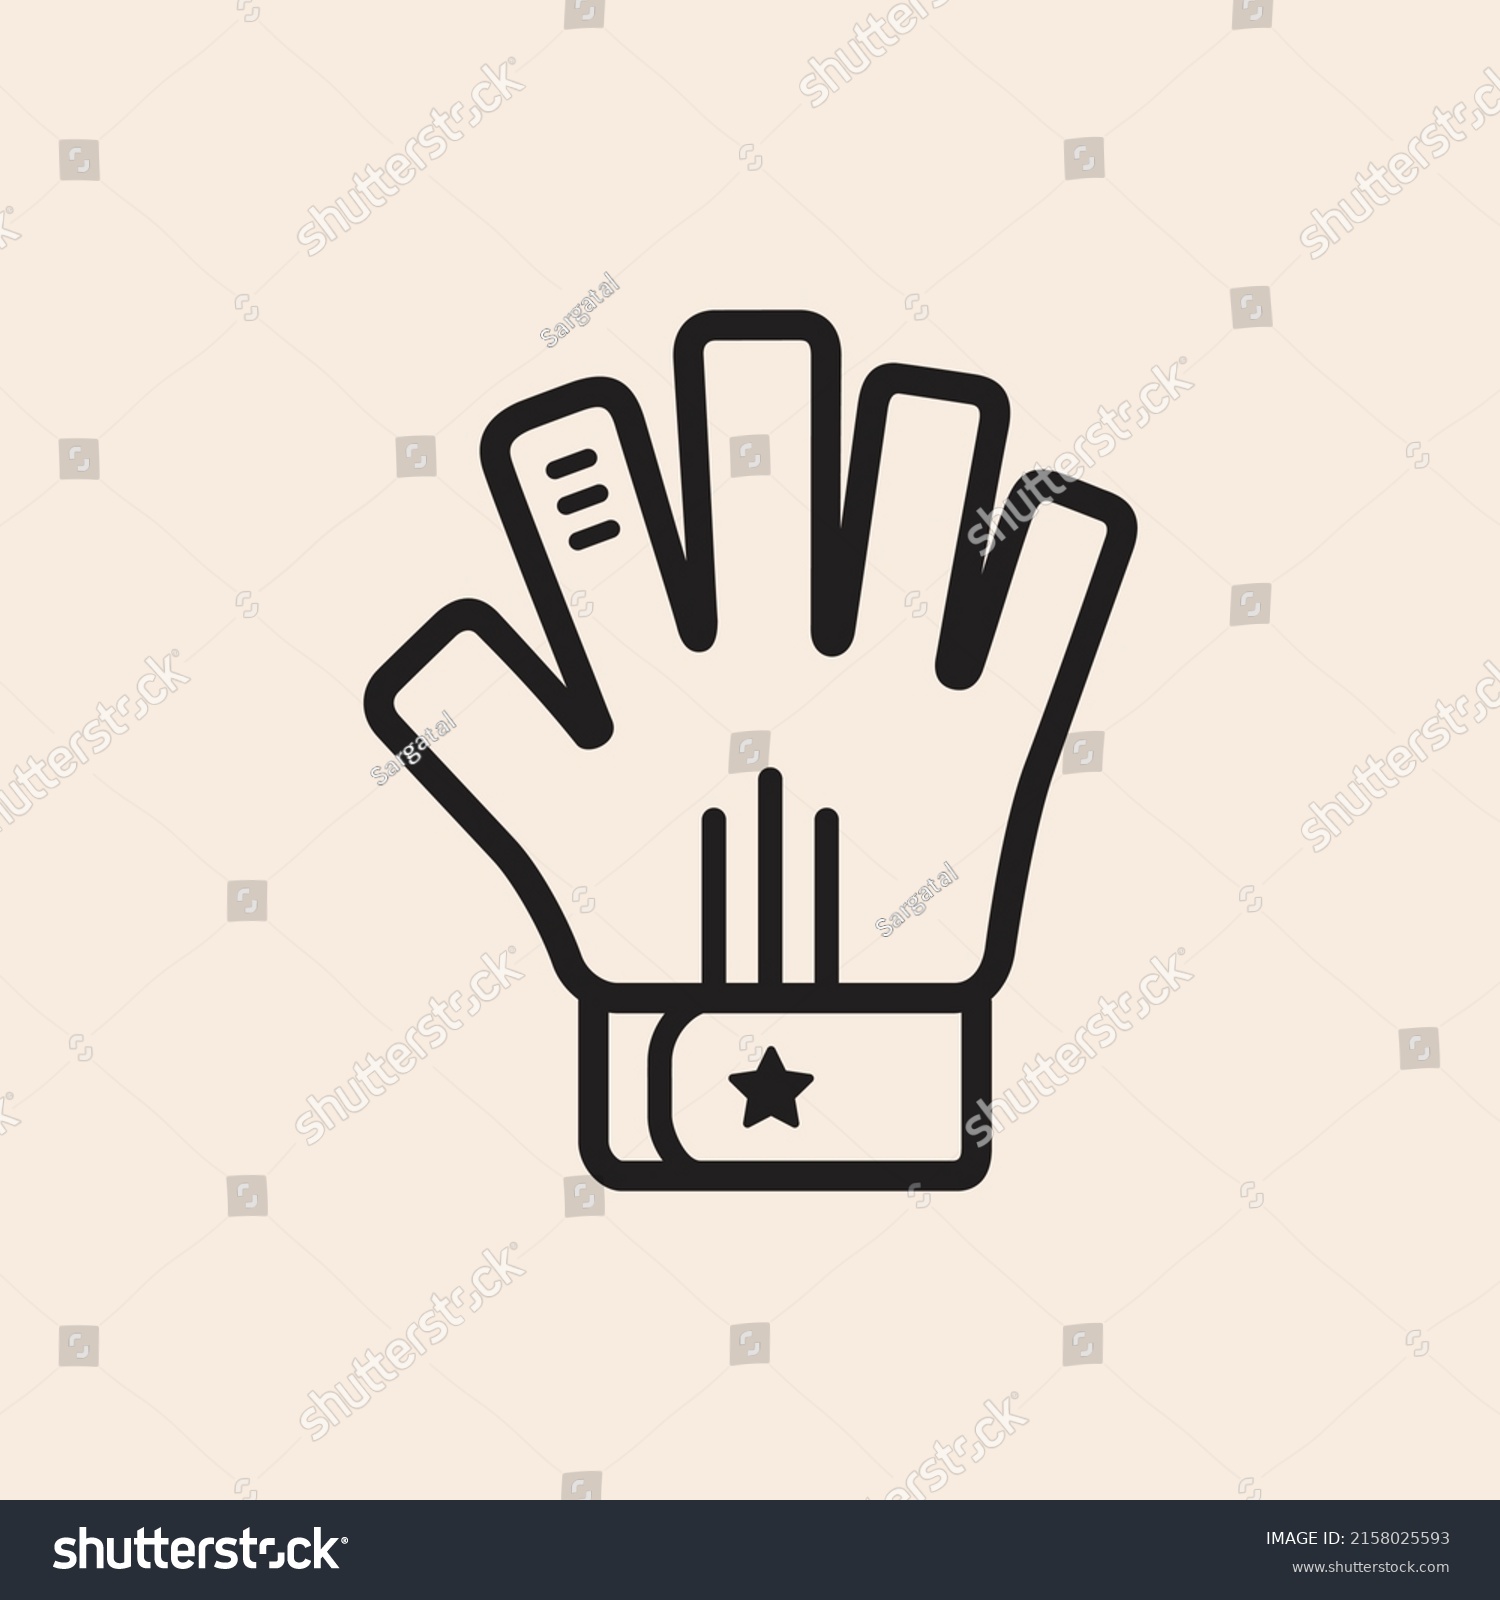 Iconic Vector Outline Soccer Football Goalkeepers Stock Vector (Royalty ...